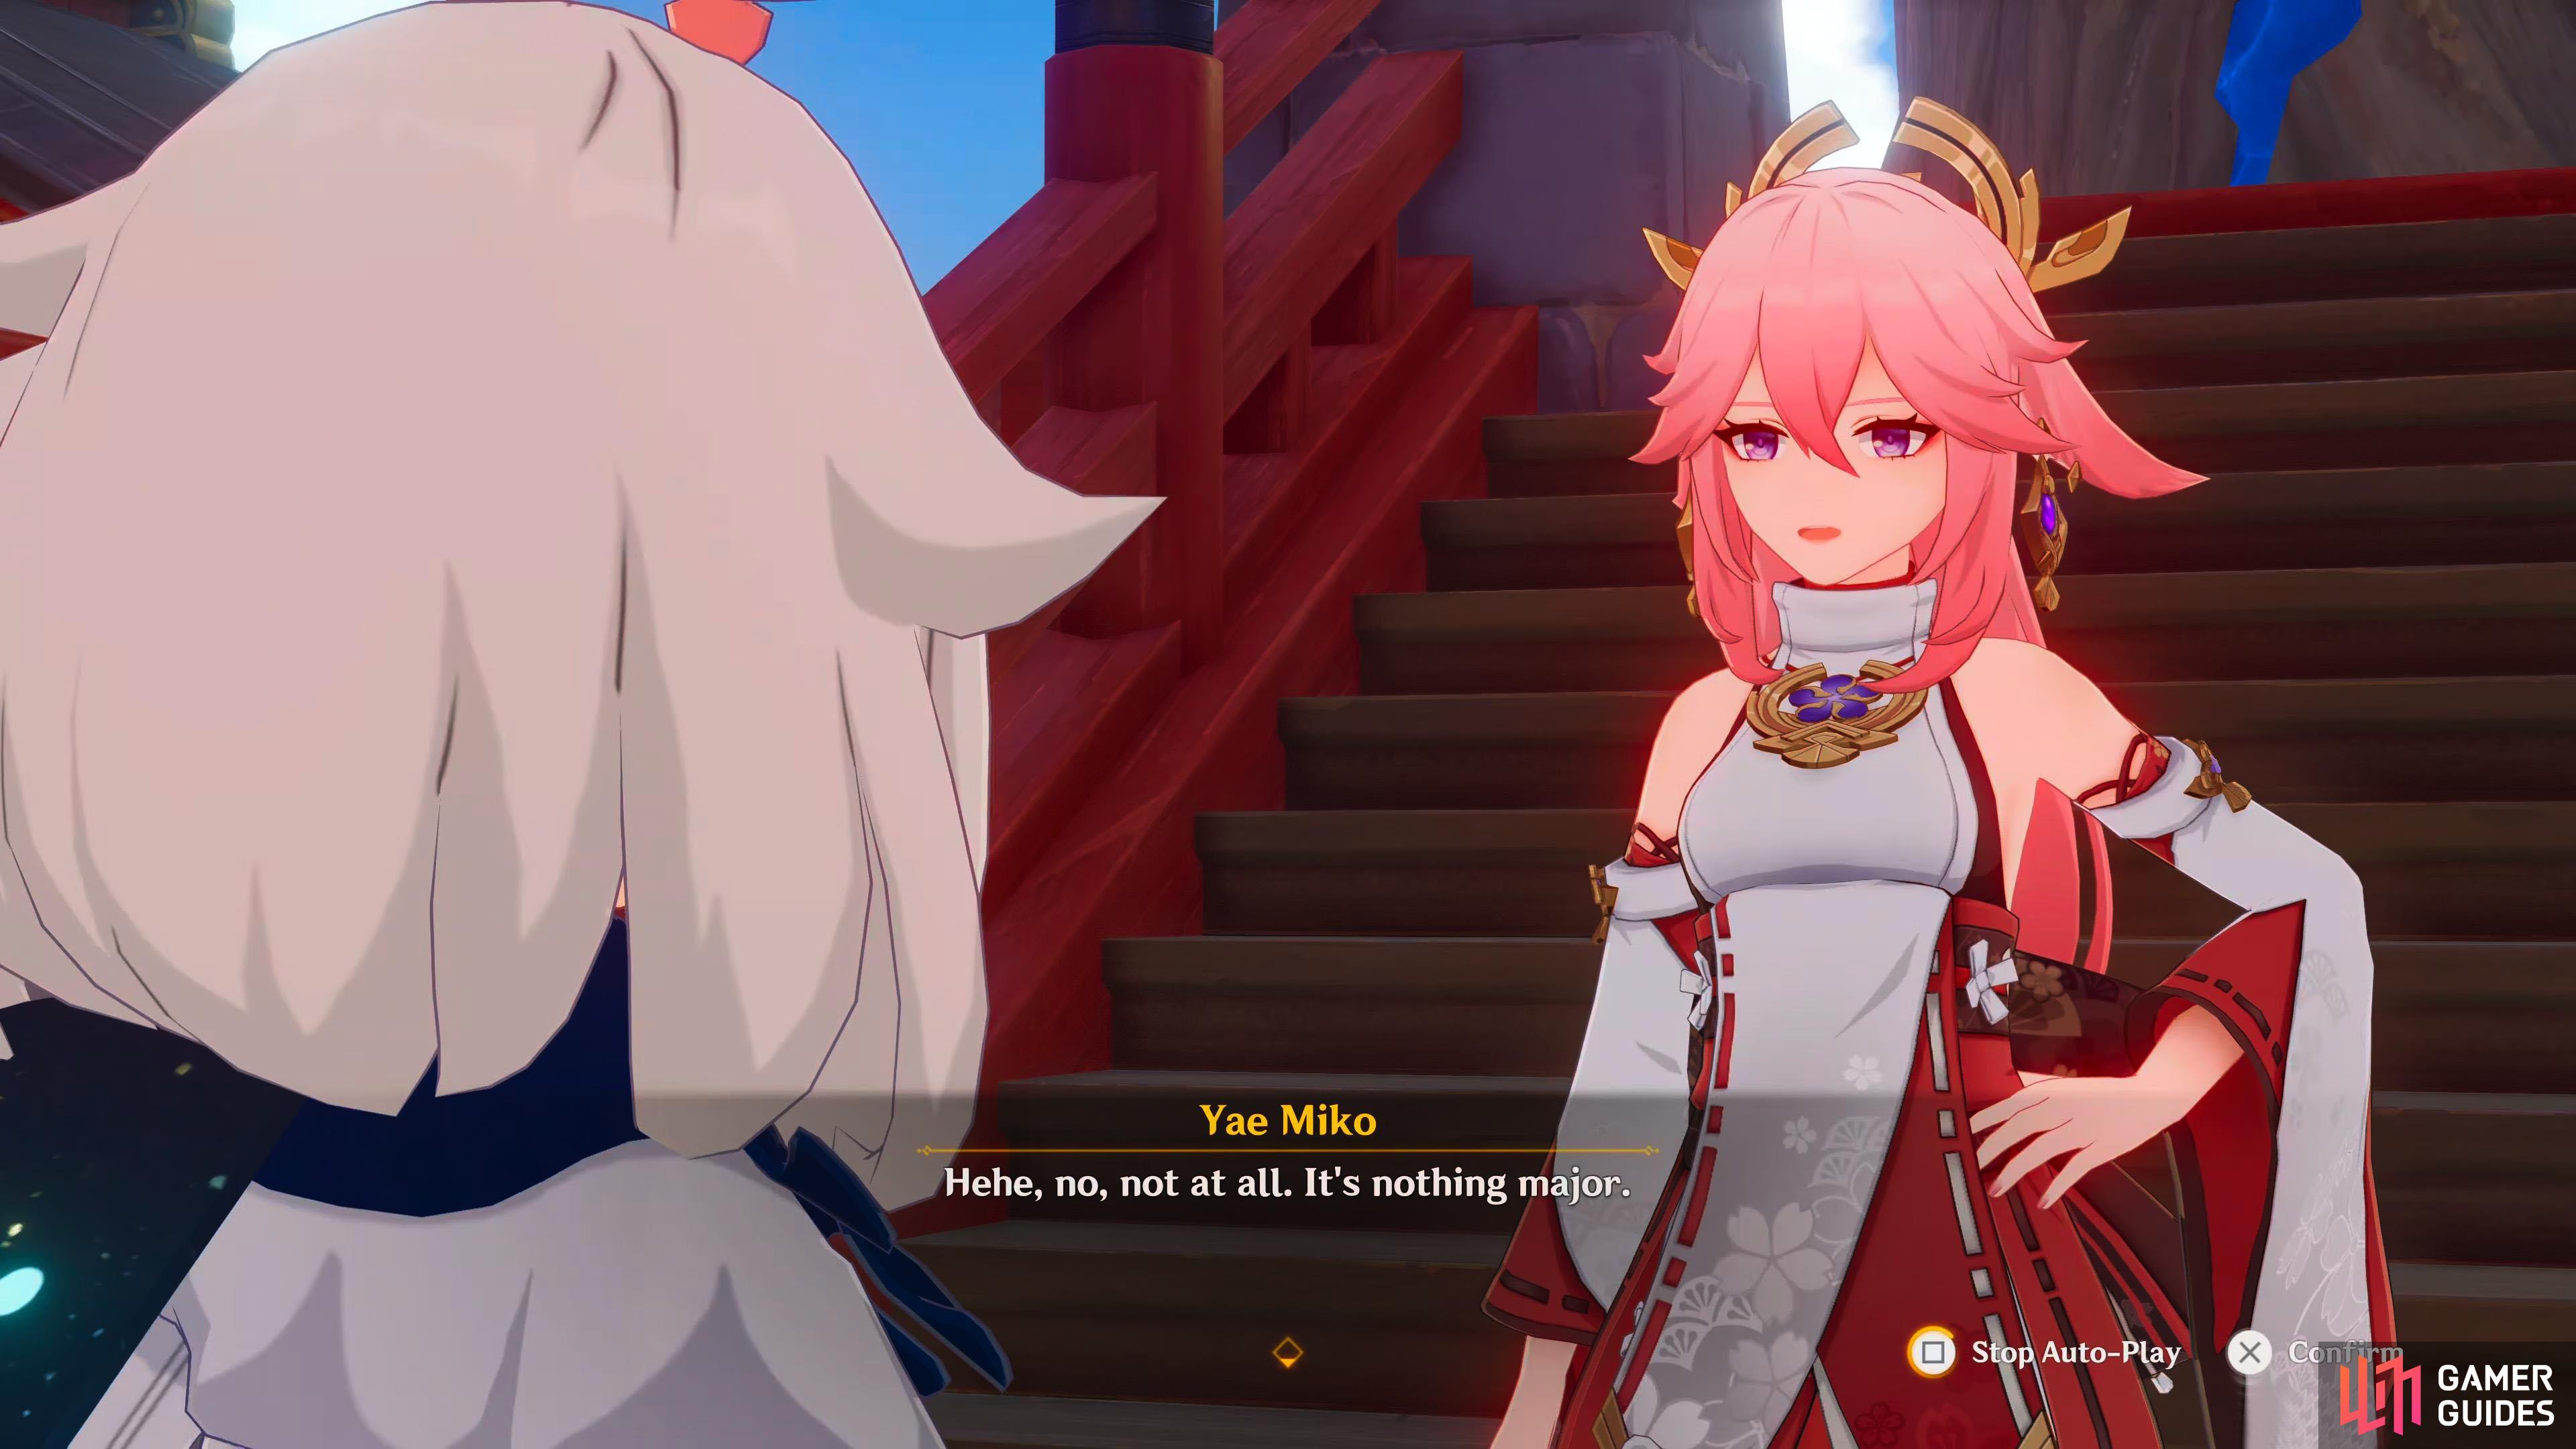 Yae Miko is somewhat busy, although she'll tell you it's nothing major.